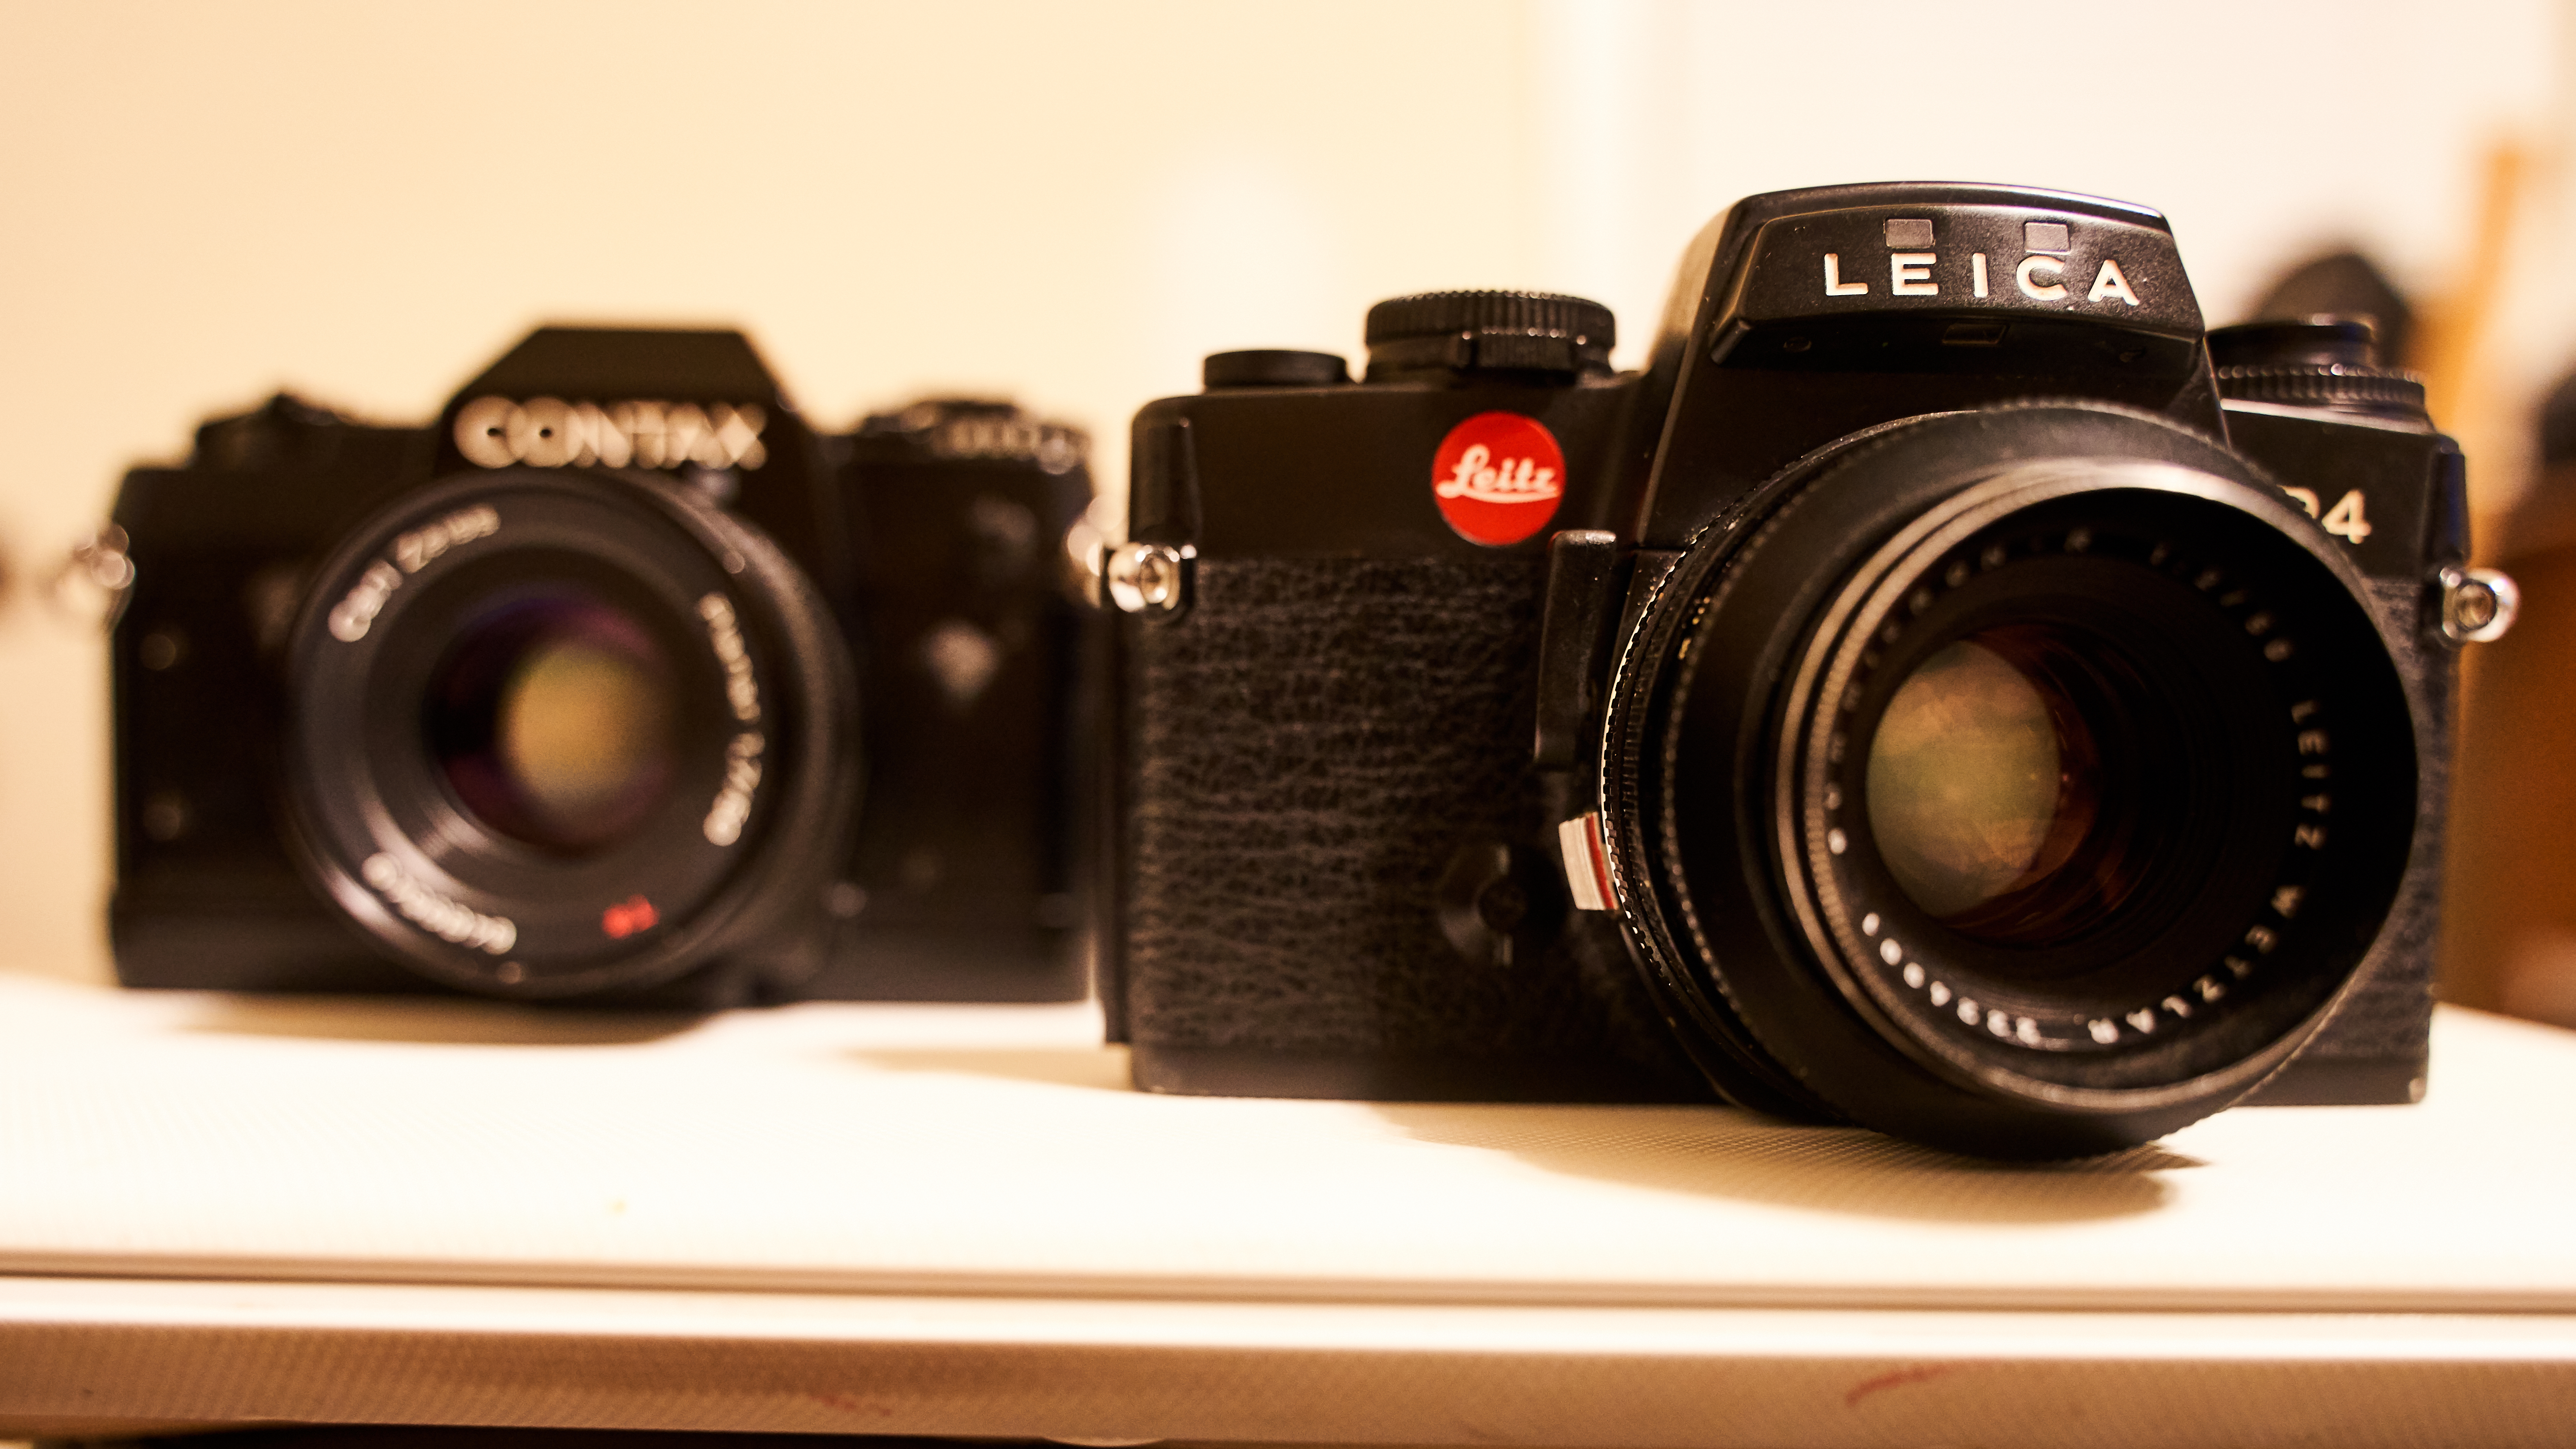 This Old Camera: Leica R4 – Eric L. Woods